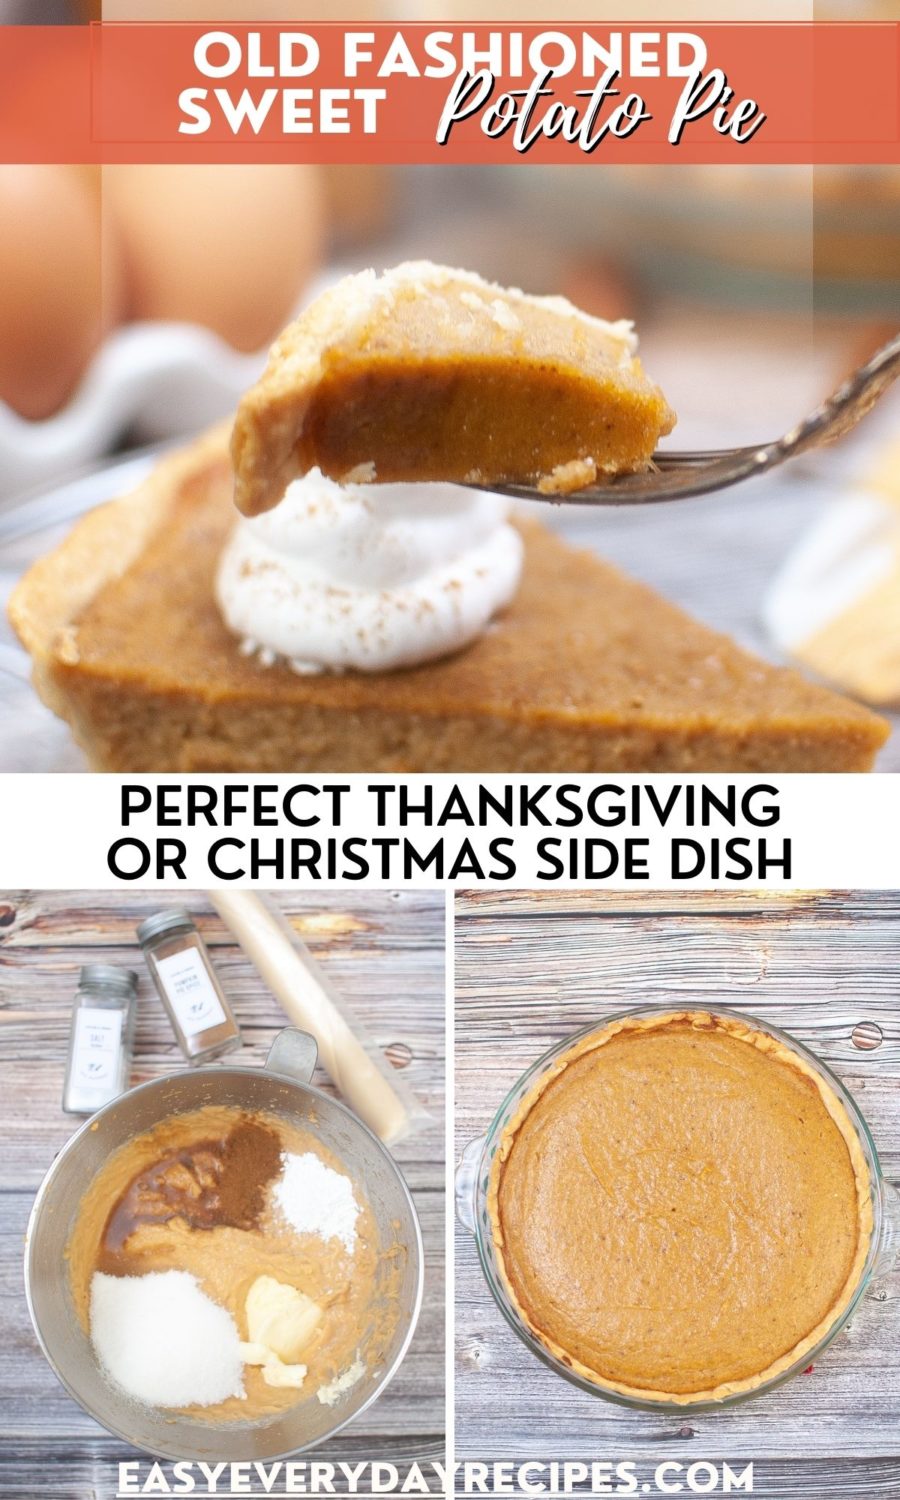 Old fashioned sweet potato pie, perfect for Thanksgiving or Christmas side dish.